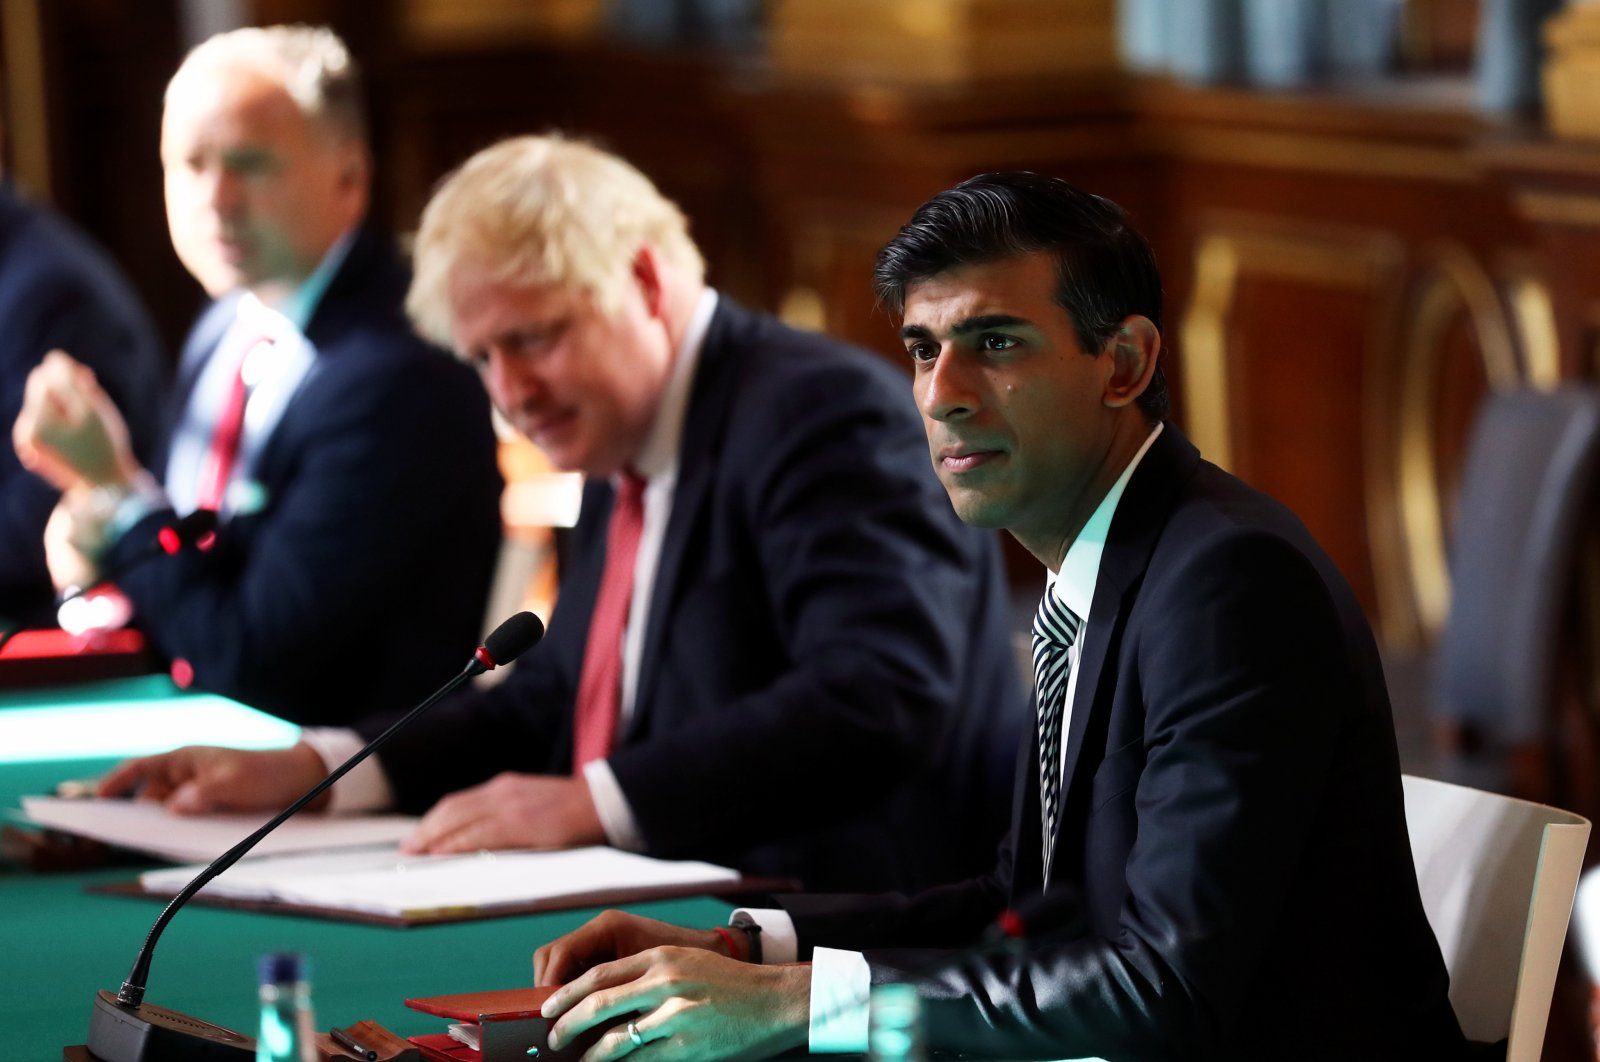 Britain's Chancellor of the Exchequer Rishi Sunak attends a face-to-face meeting of the cabinet team of ministers at the Foreign and Commonwealth Office (FCO) in London, Britain, July 21, 2020. (Reuters Photo)